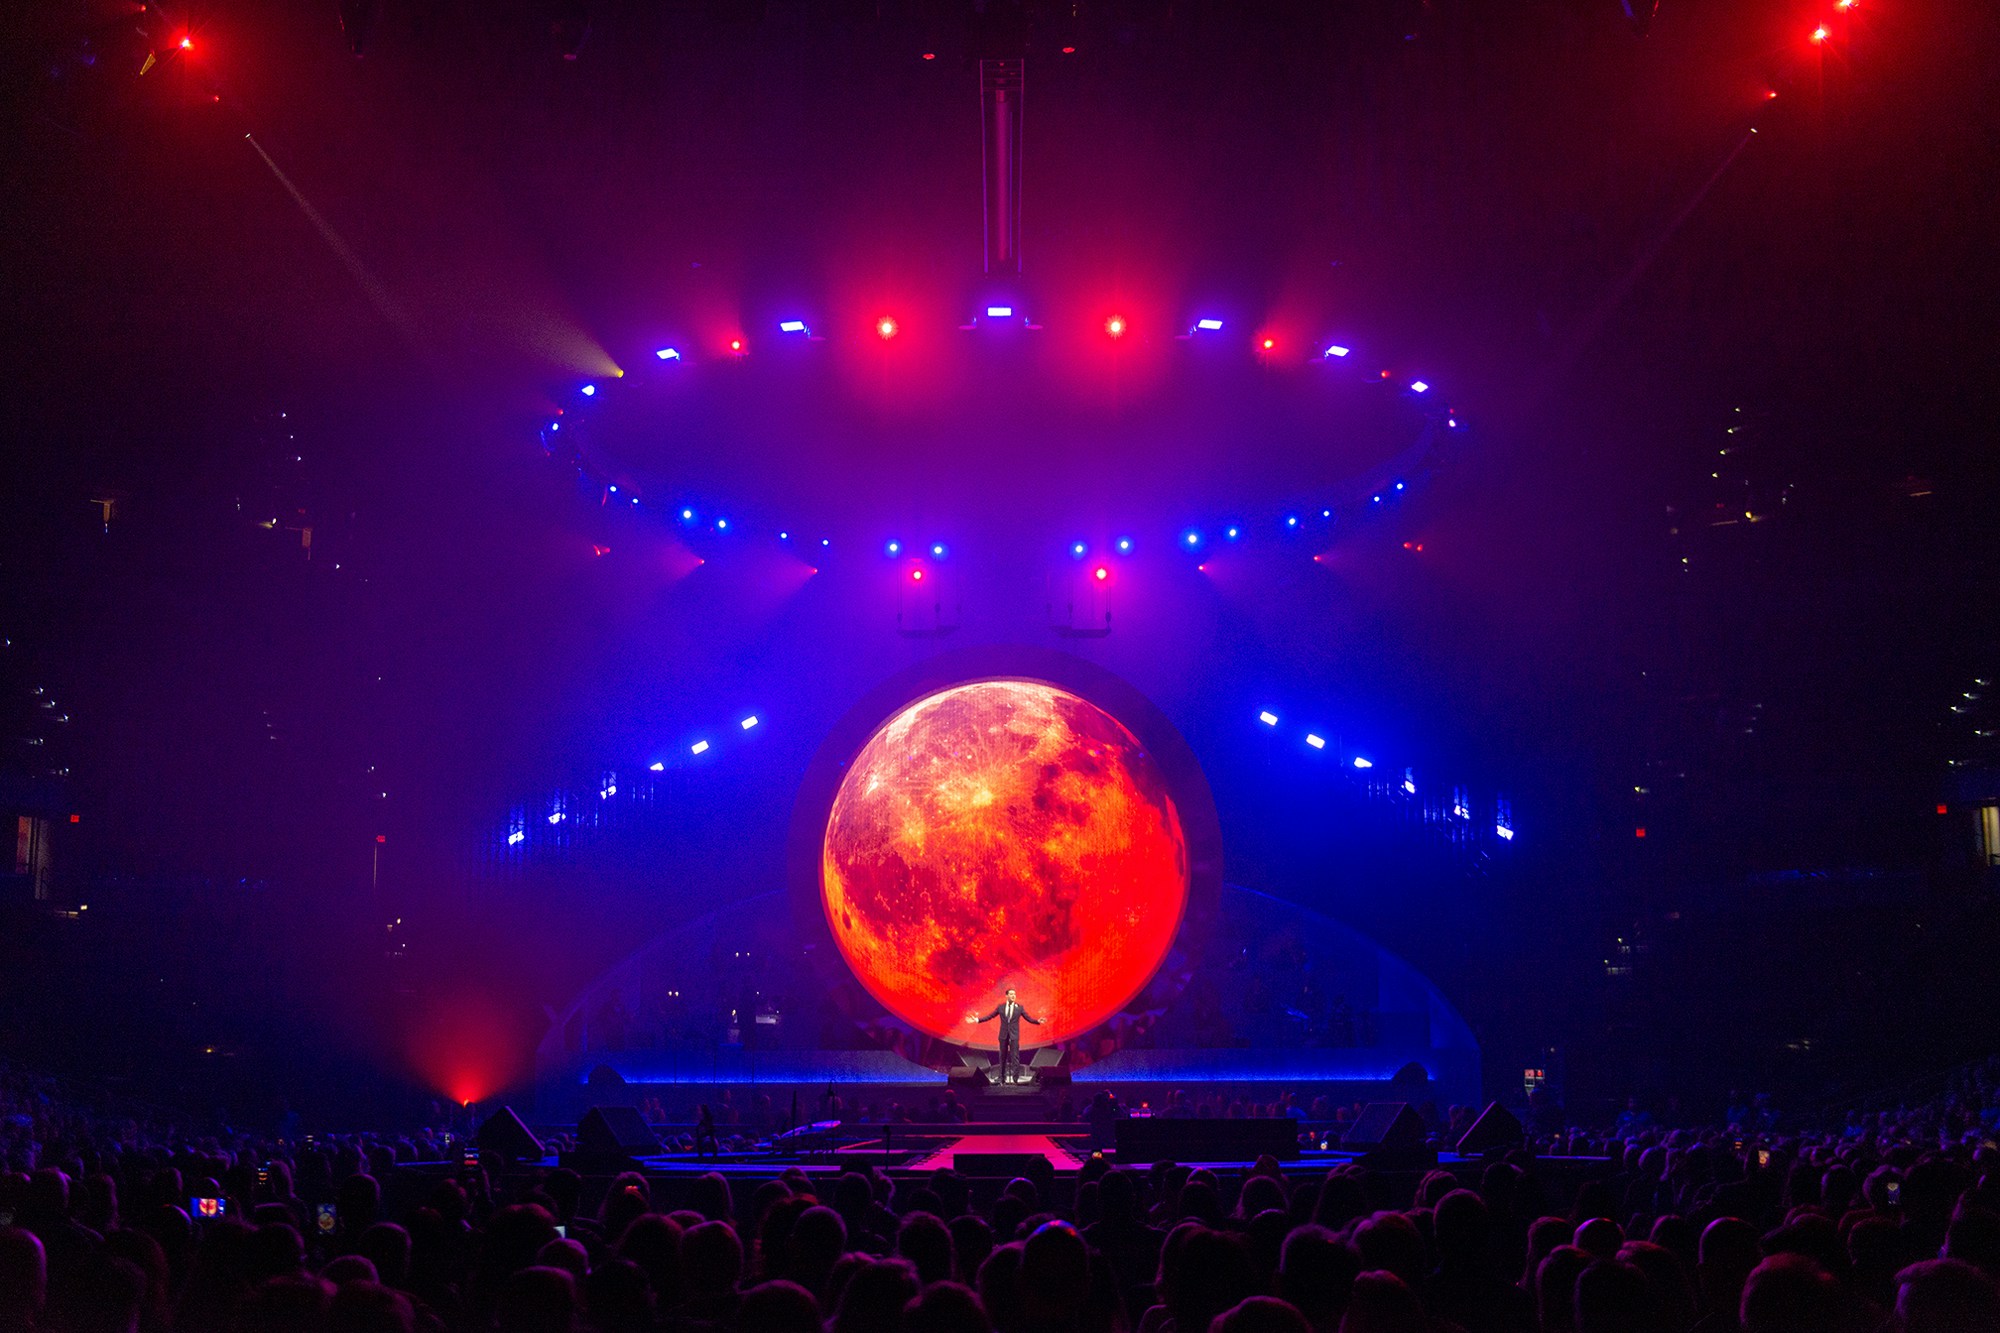  Michael Bublé Love red moon